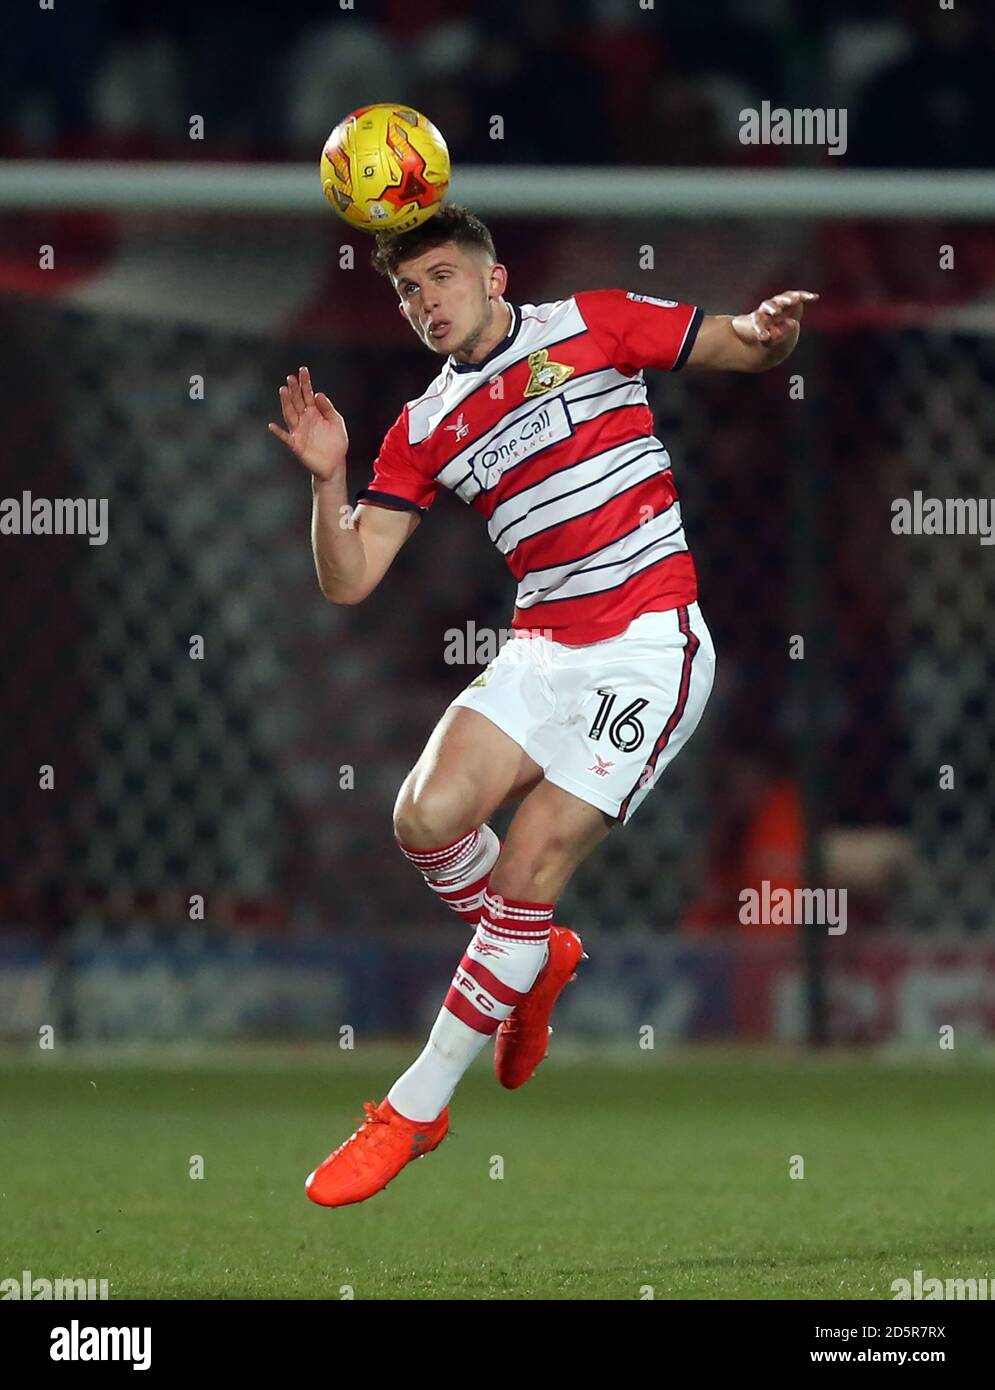 Doncaster Rovers' Jordan Houghton on the ball Stock Photo - Alamy